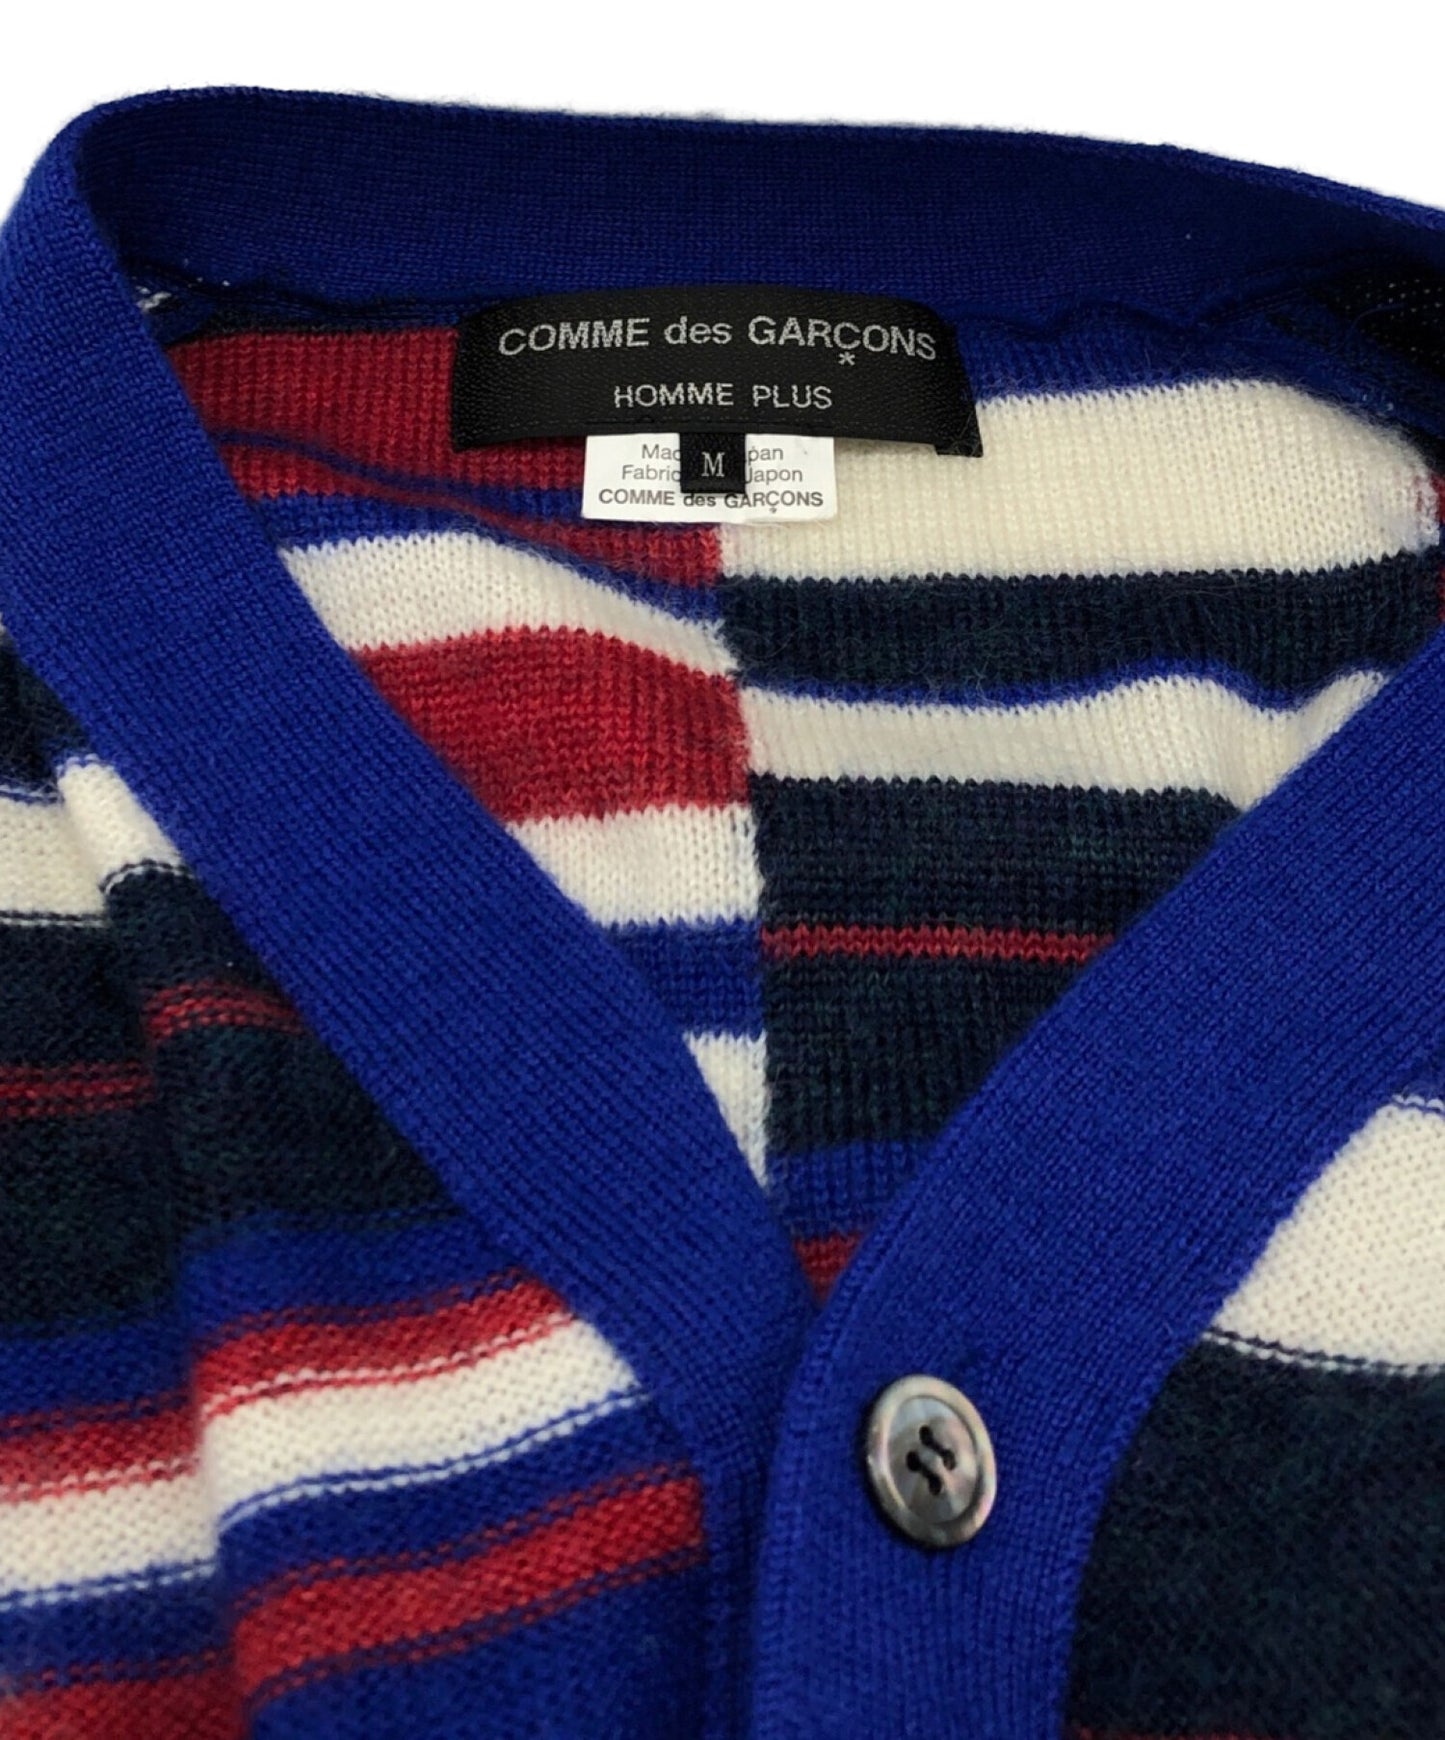 COMME des GARCONS HOMME PLUS Reconstructed Cardigan PF-N002/AD2020